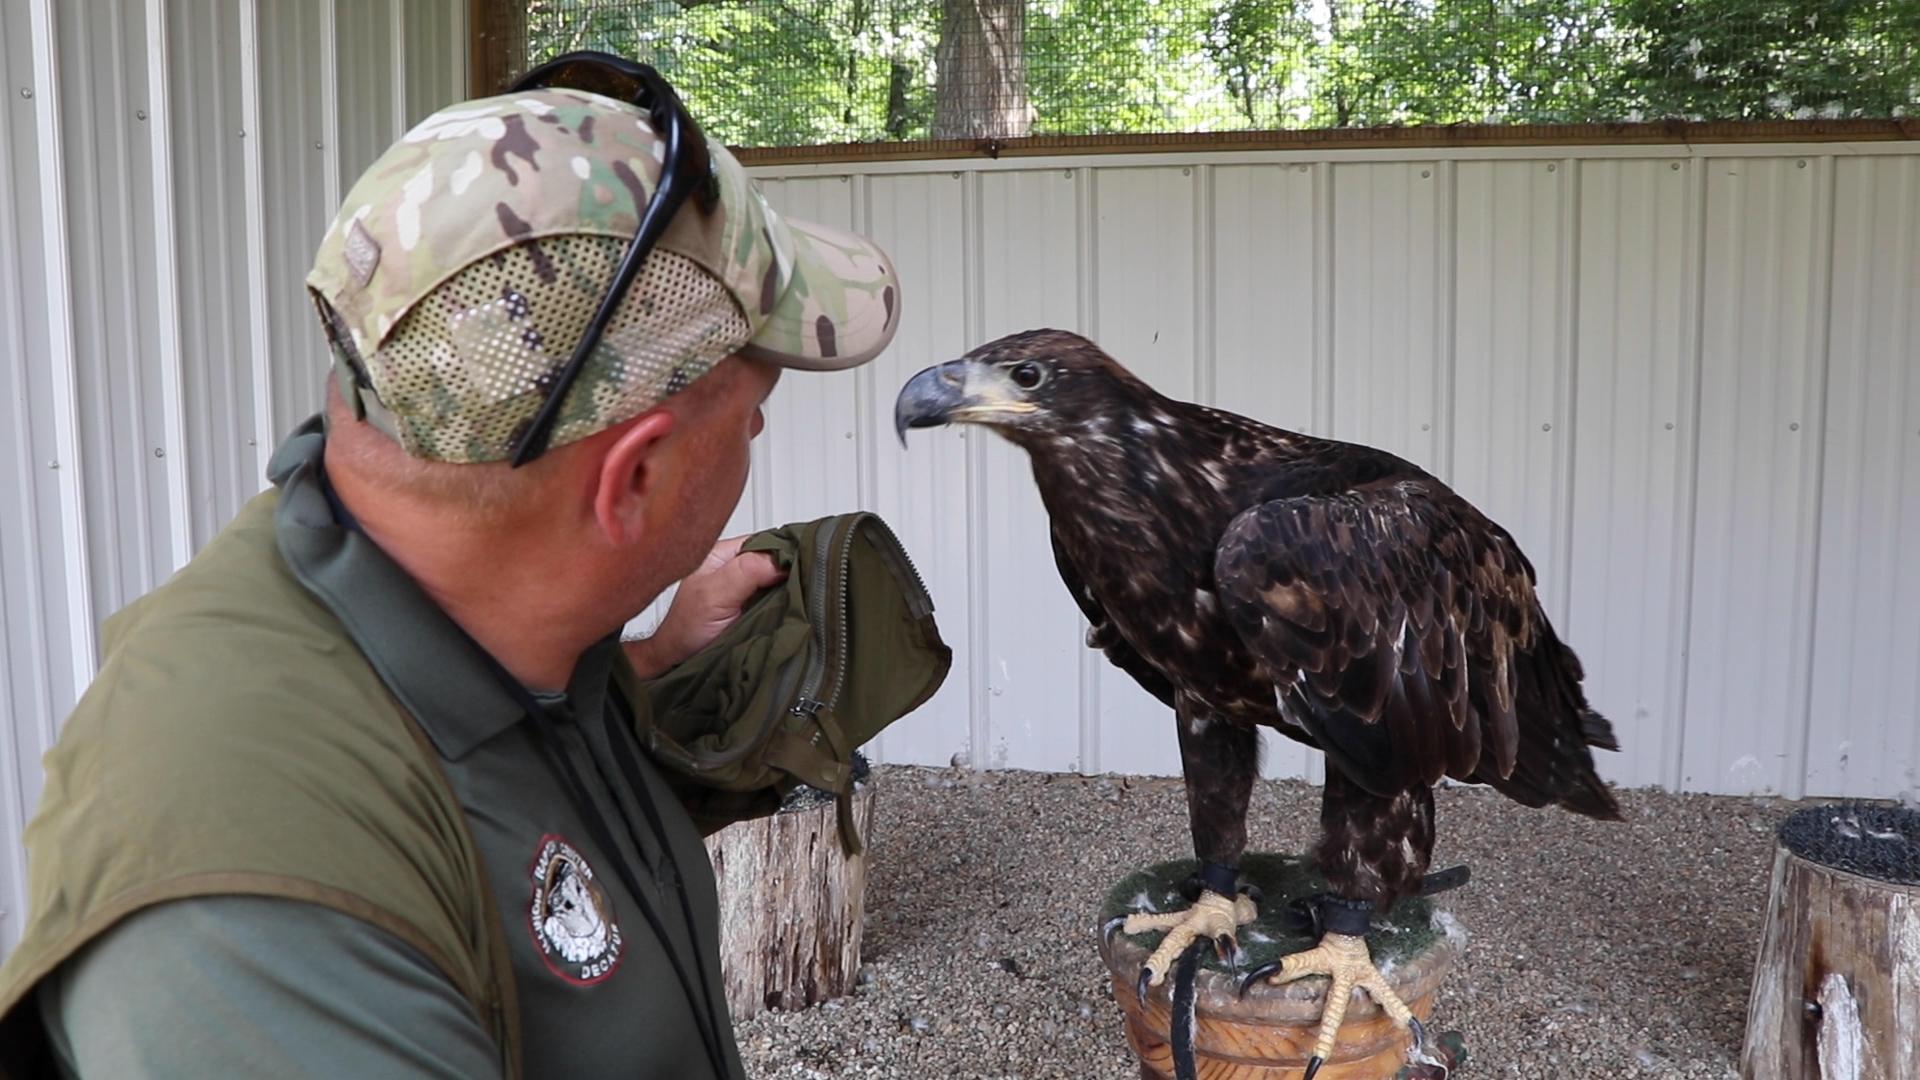 Illinois Raptor Center Program Director Jacques Nuzzo visits Laura, a two-year-old bald eagle that tested positive for West Nile Disease. Bald eagles don’t get their white-feathered heads until they’re about 5 years old. (Evan Garcia / WTTW News)